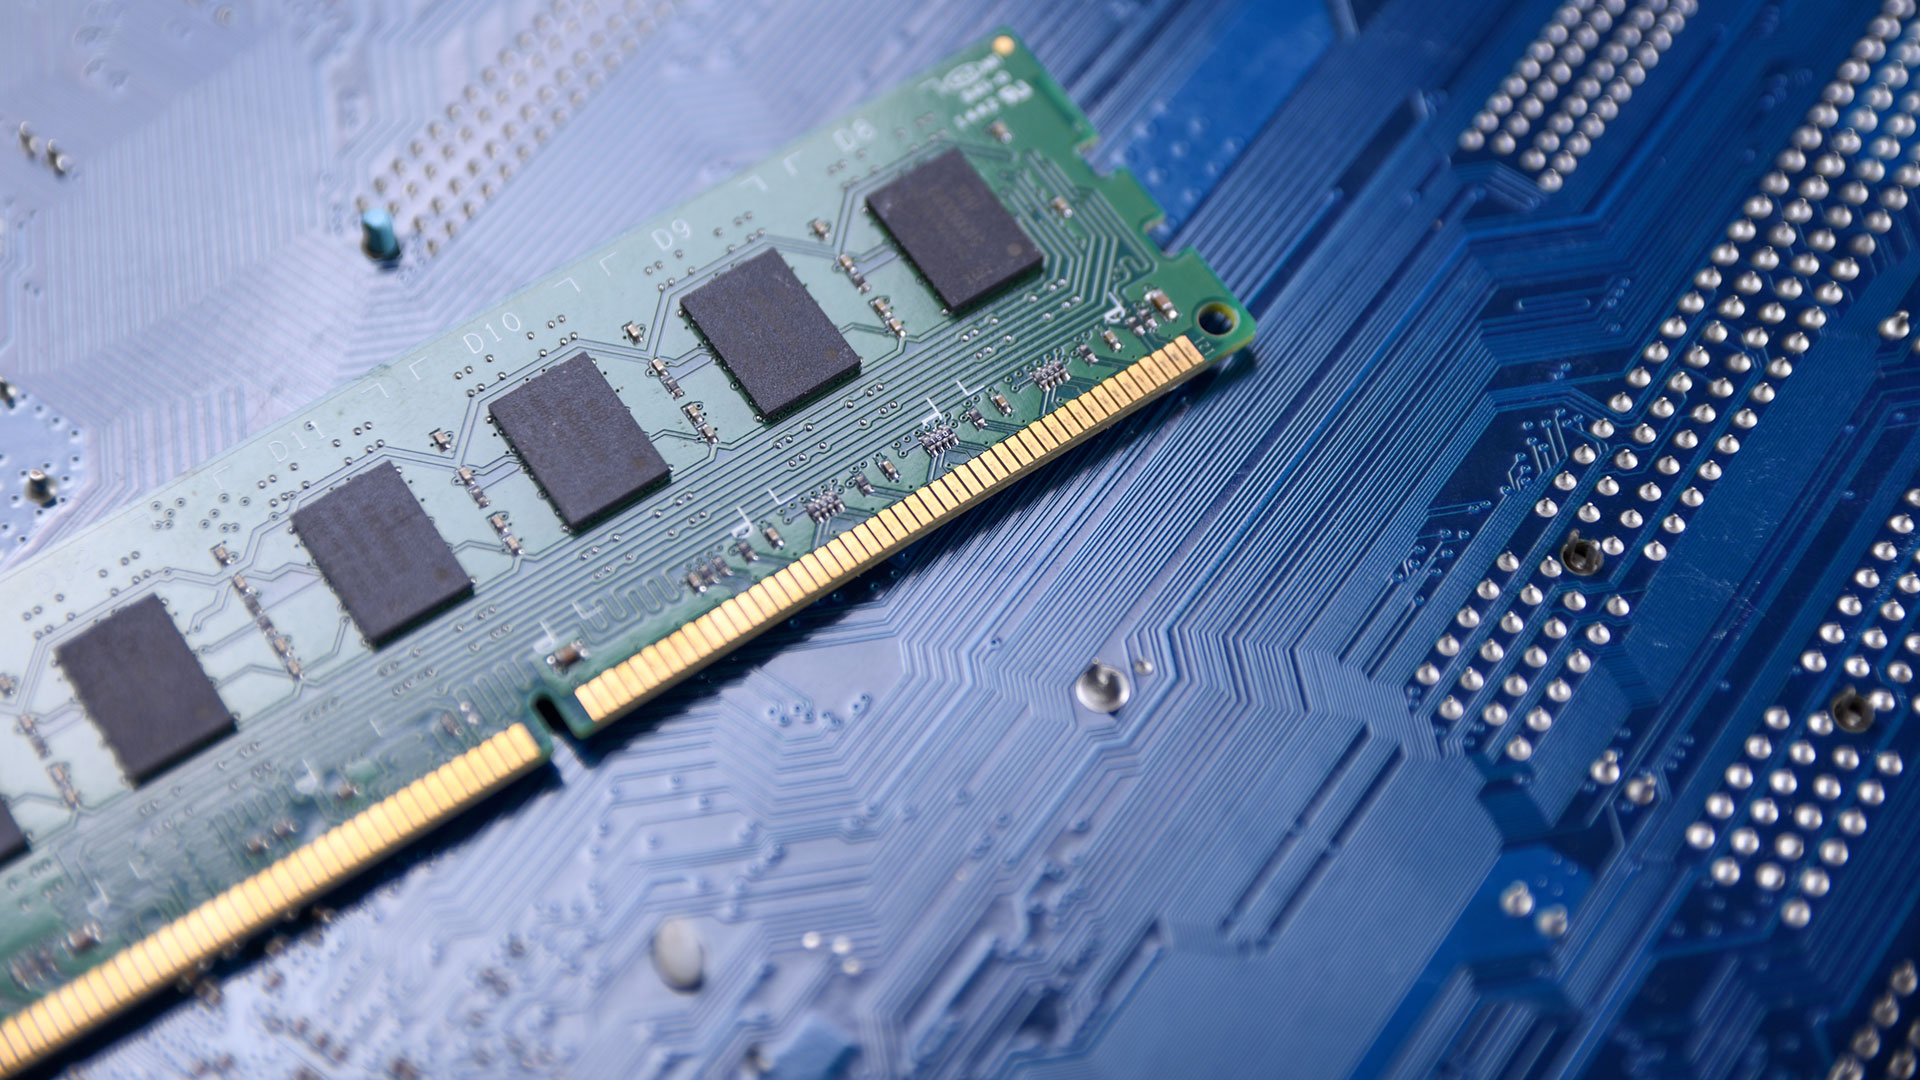 Samsung and SK hynix abandon DDR3 production to focus on unrelenting demand for HBM3